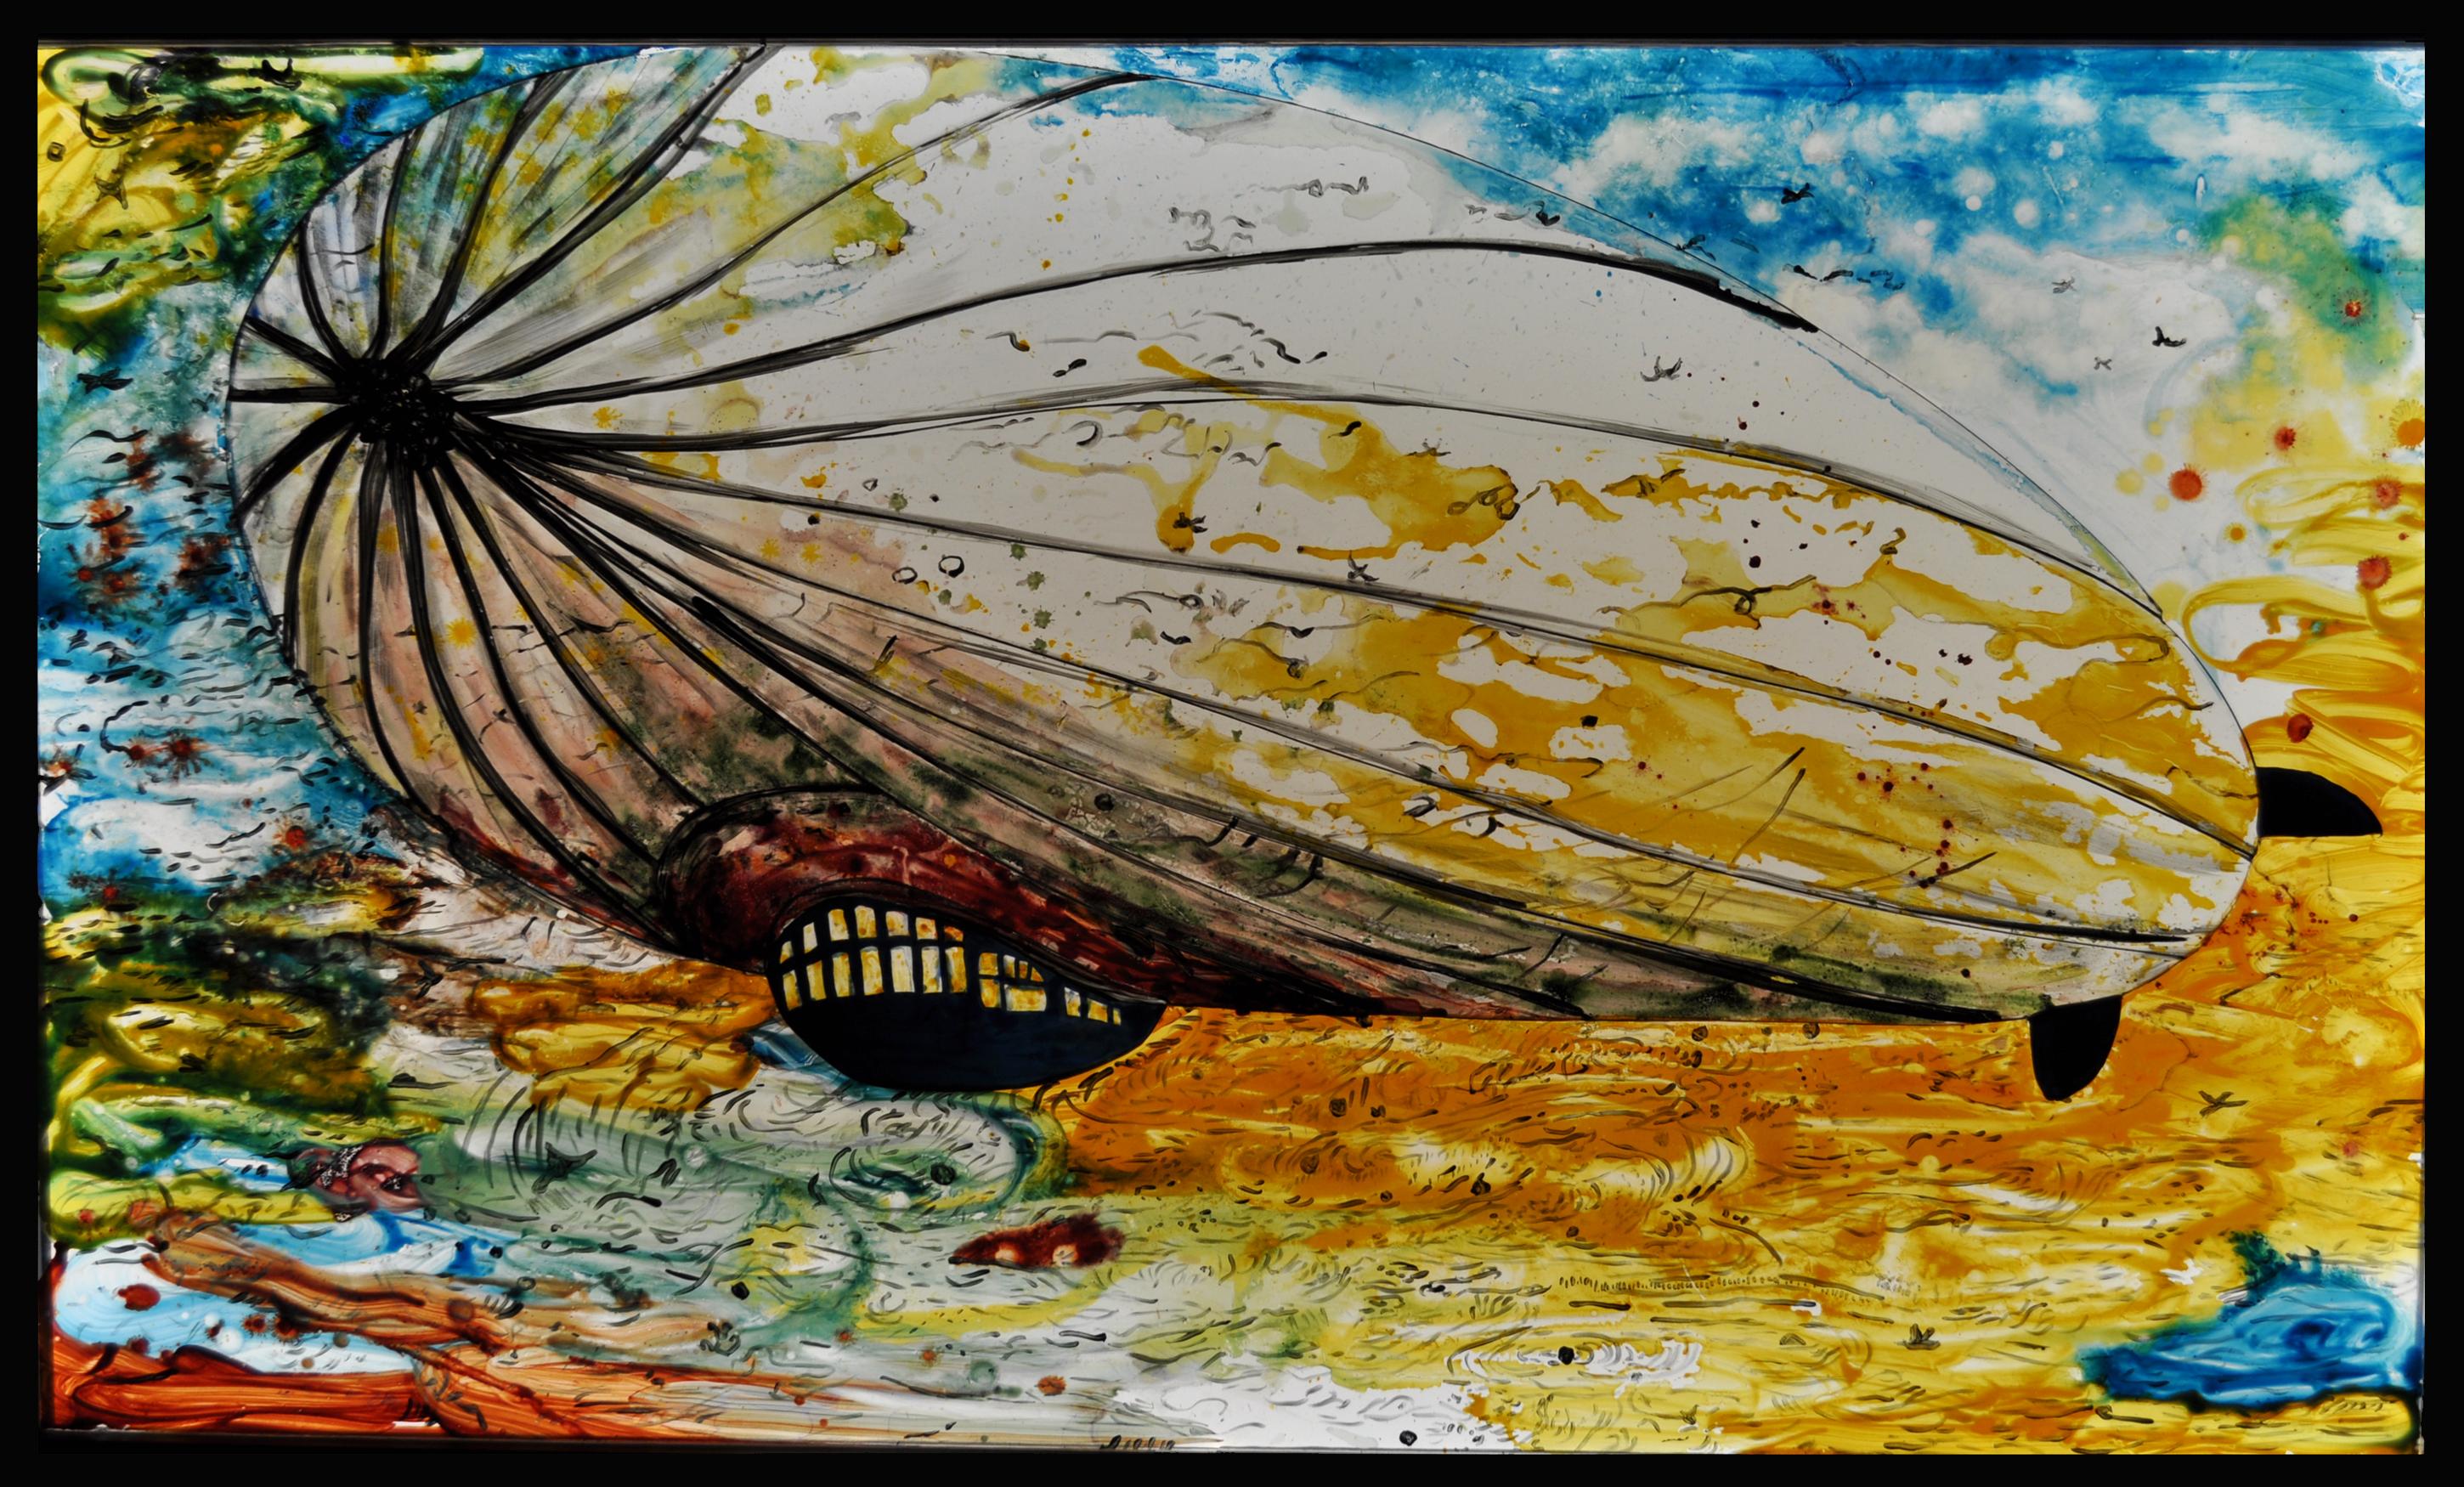 Mie Mørkeberg Figurative Painting - Scandinavian Stained Glass Window/Painting "Glass Zeppeliner"